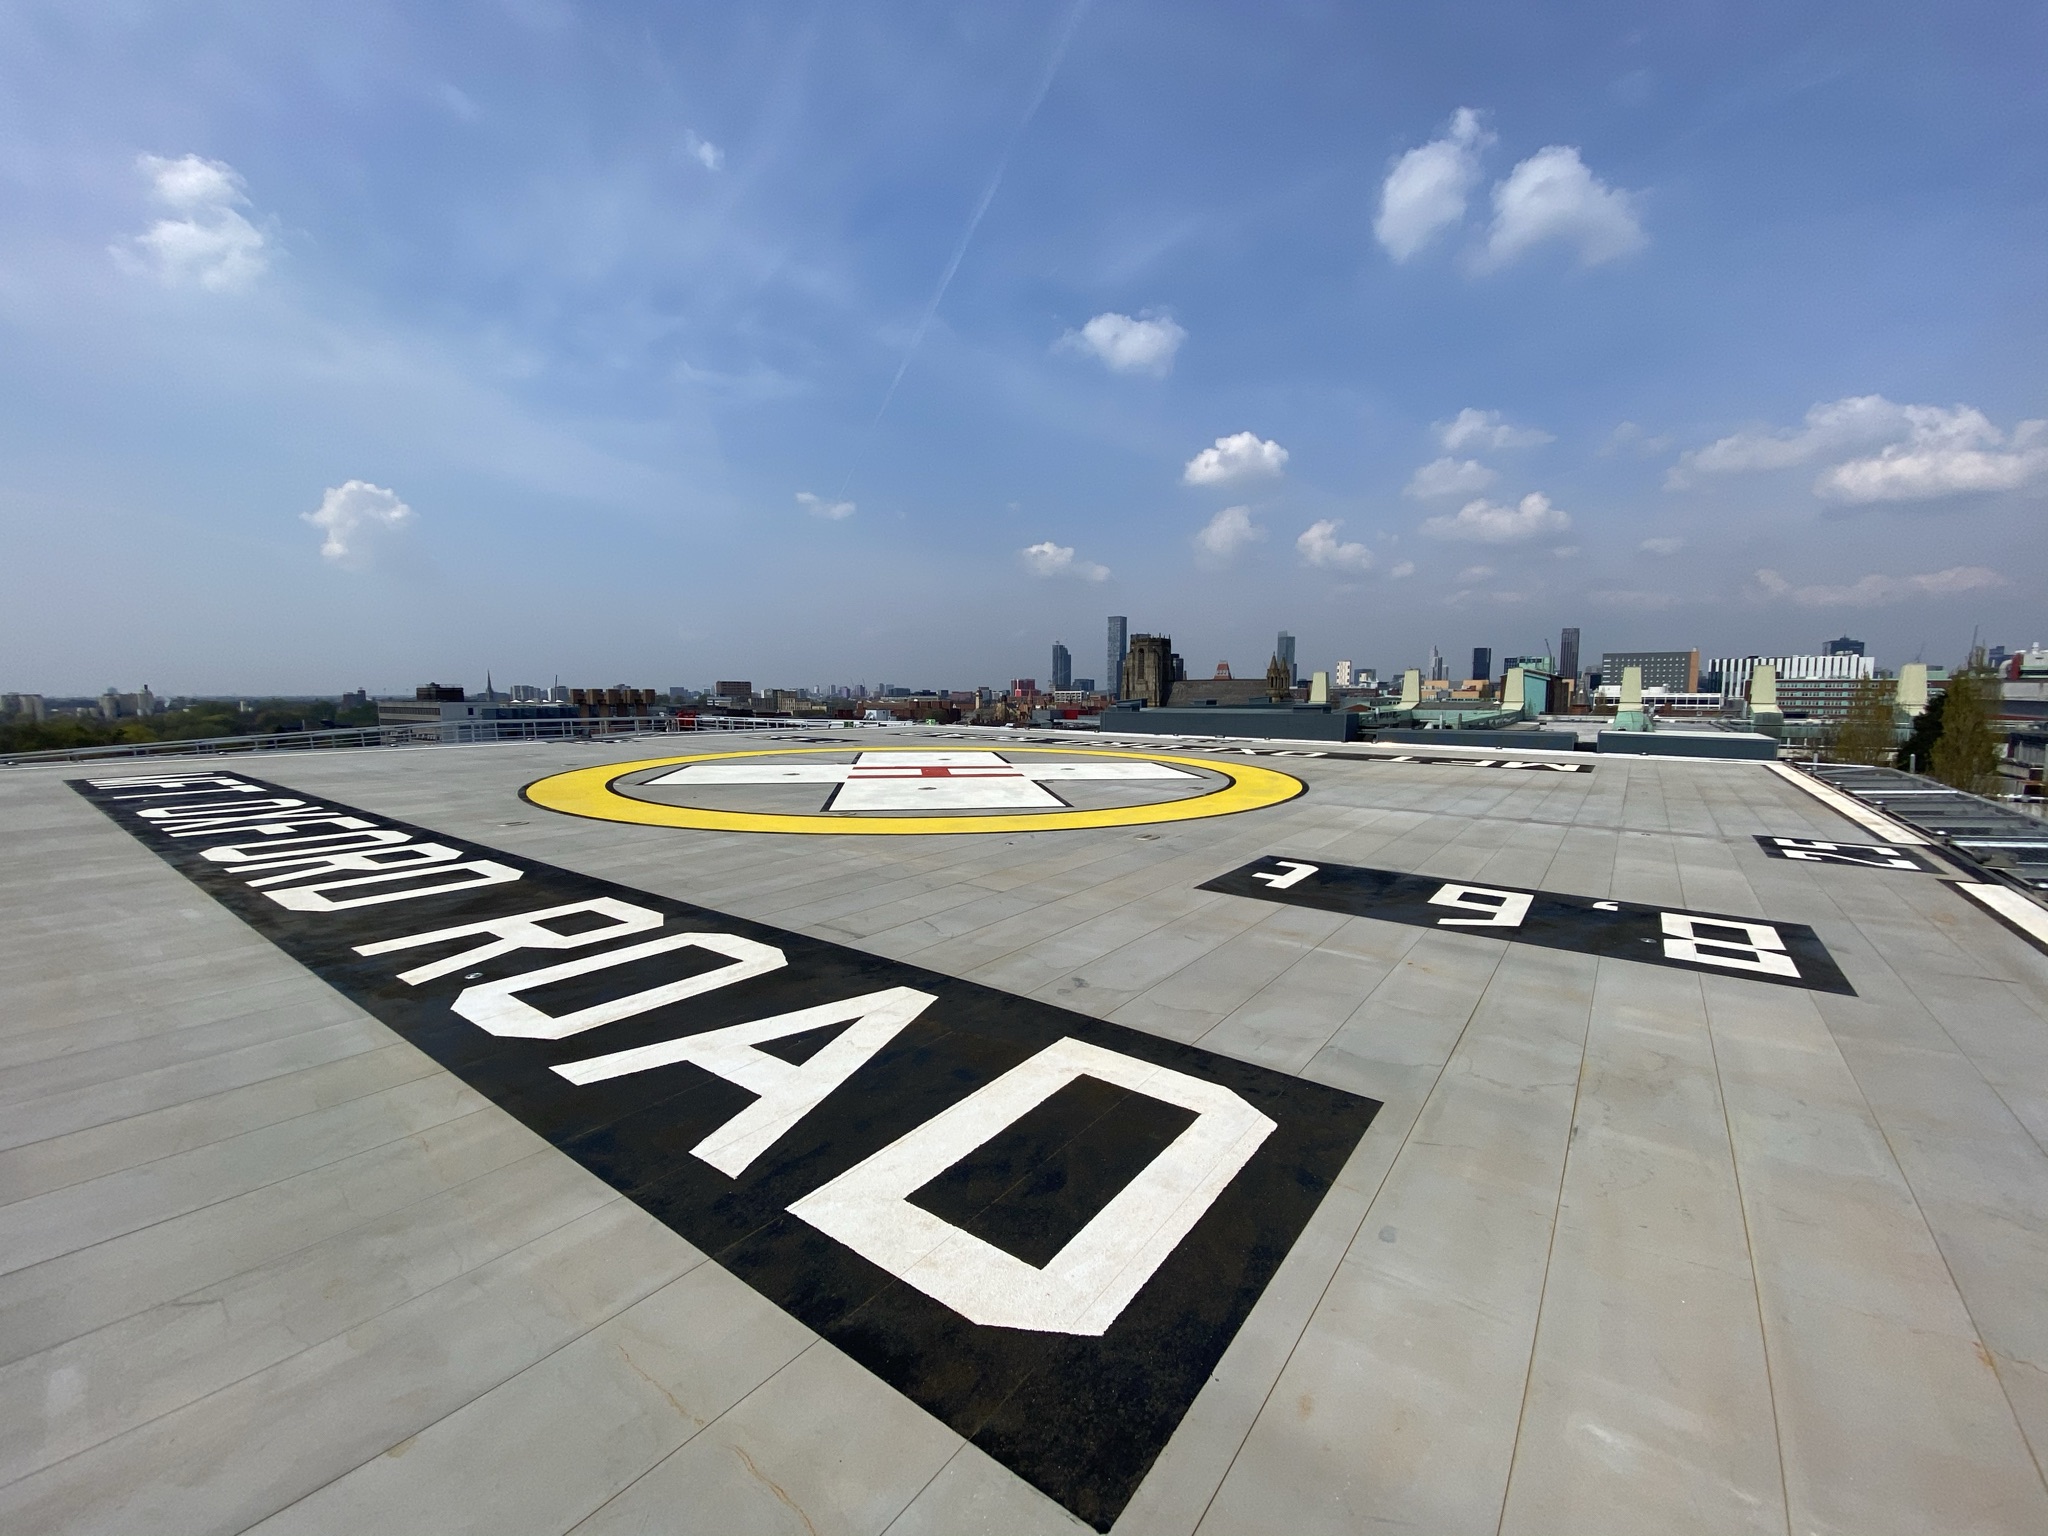 View from the top of MFT’s helipad in Manchester city centre